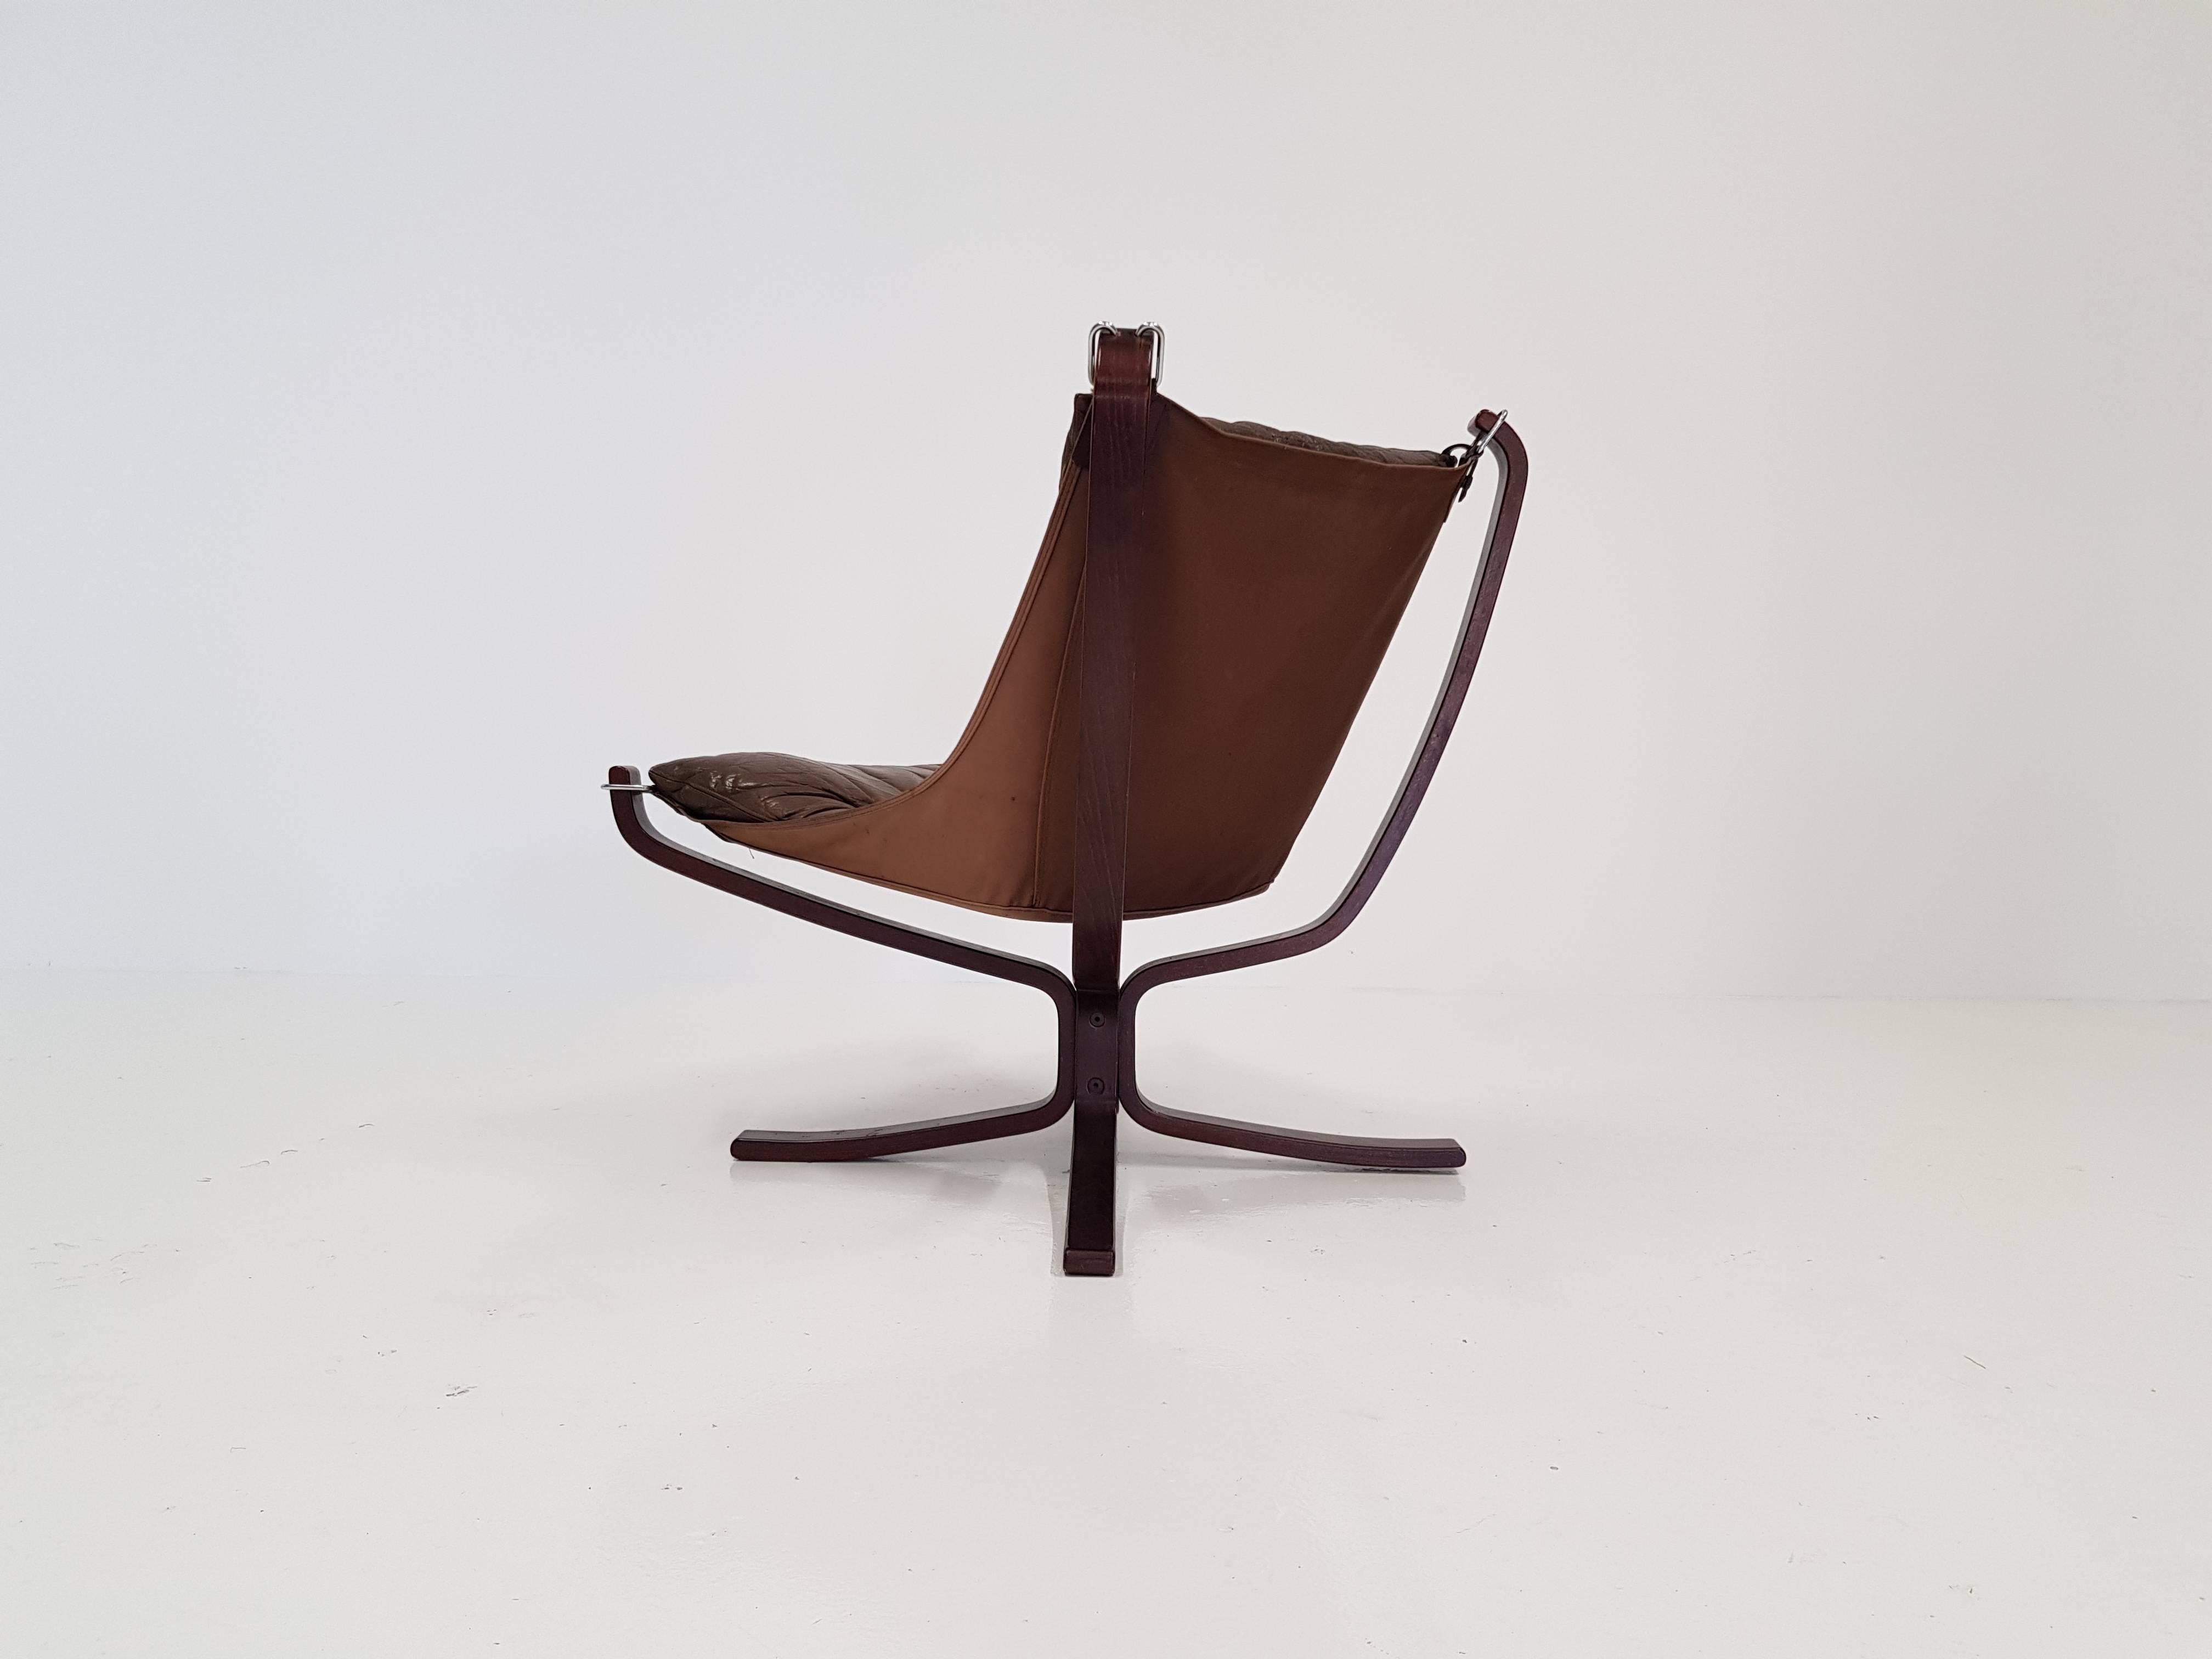 Beech Vintage Low-Backed X-Framed Sigurd Ressell Designed Falcon Chair, 1970s